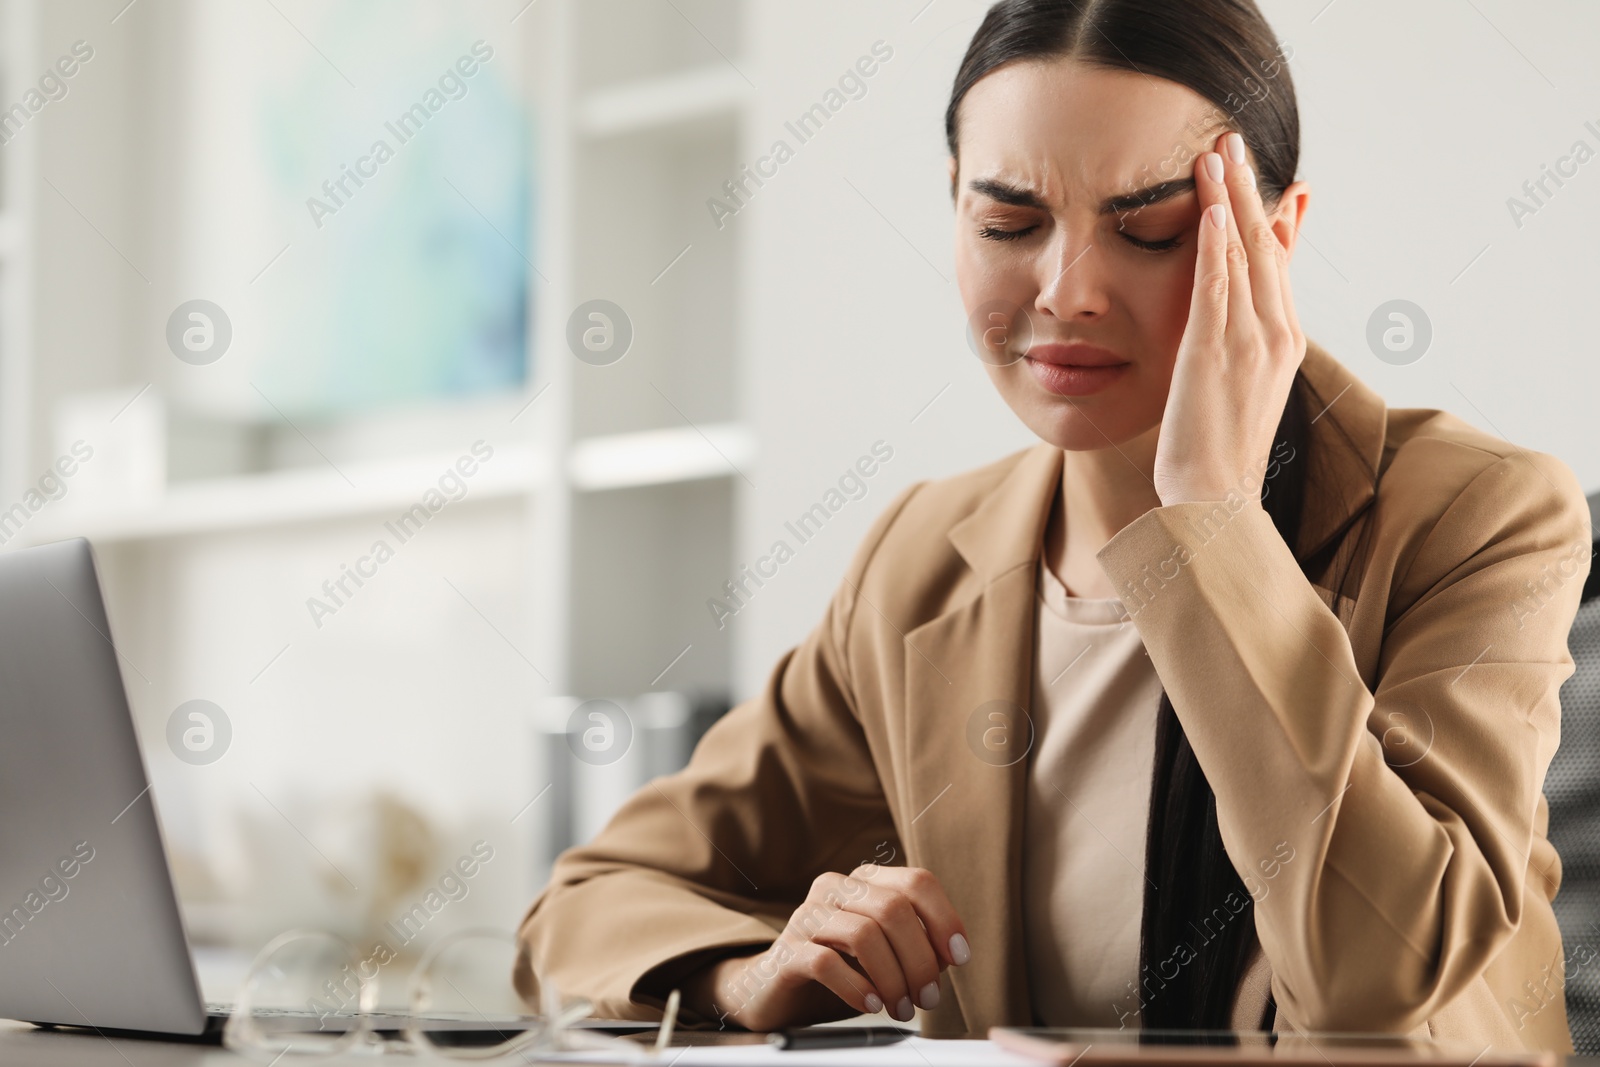 Photo of Woman suffering from headache at workplace in office, space for text